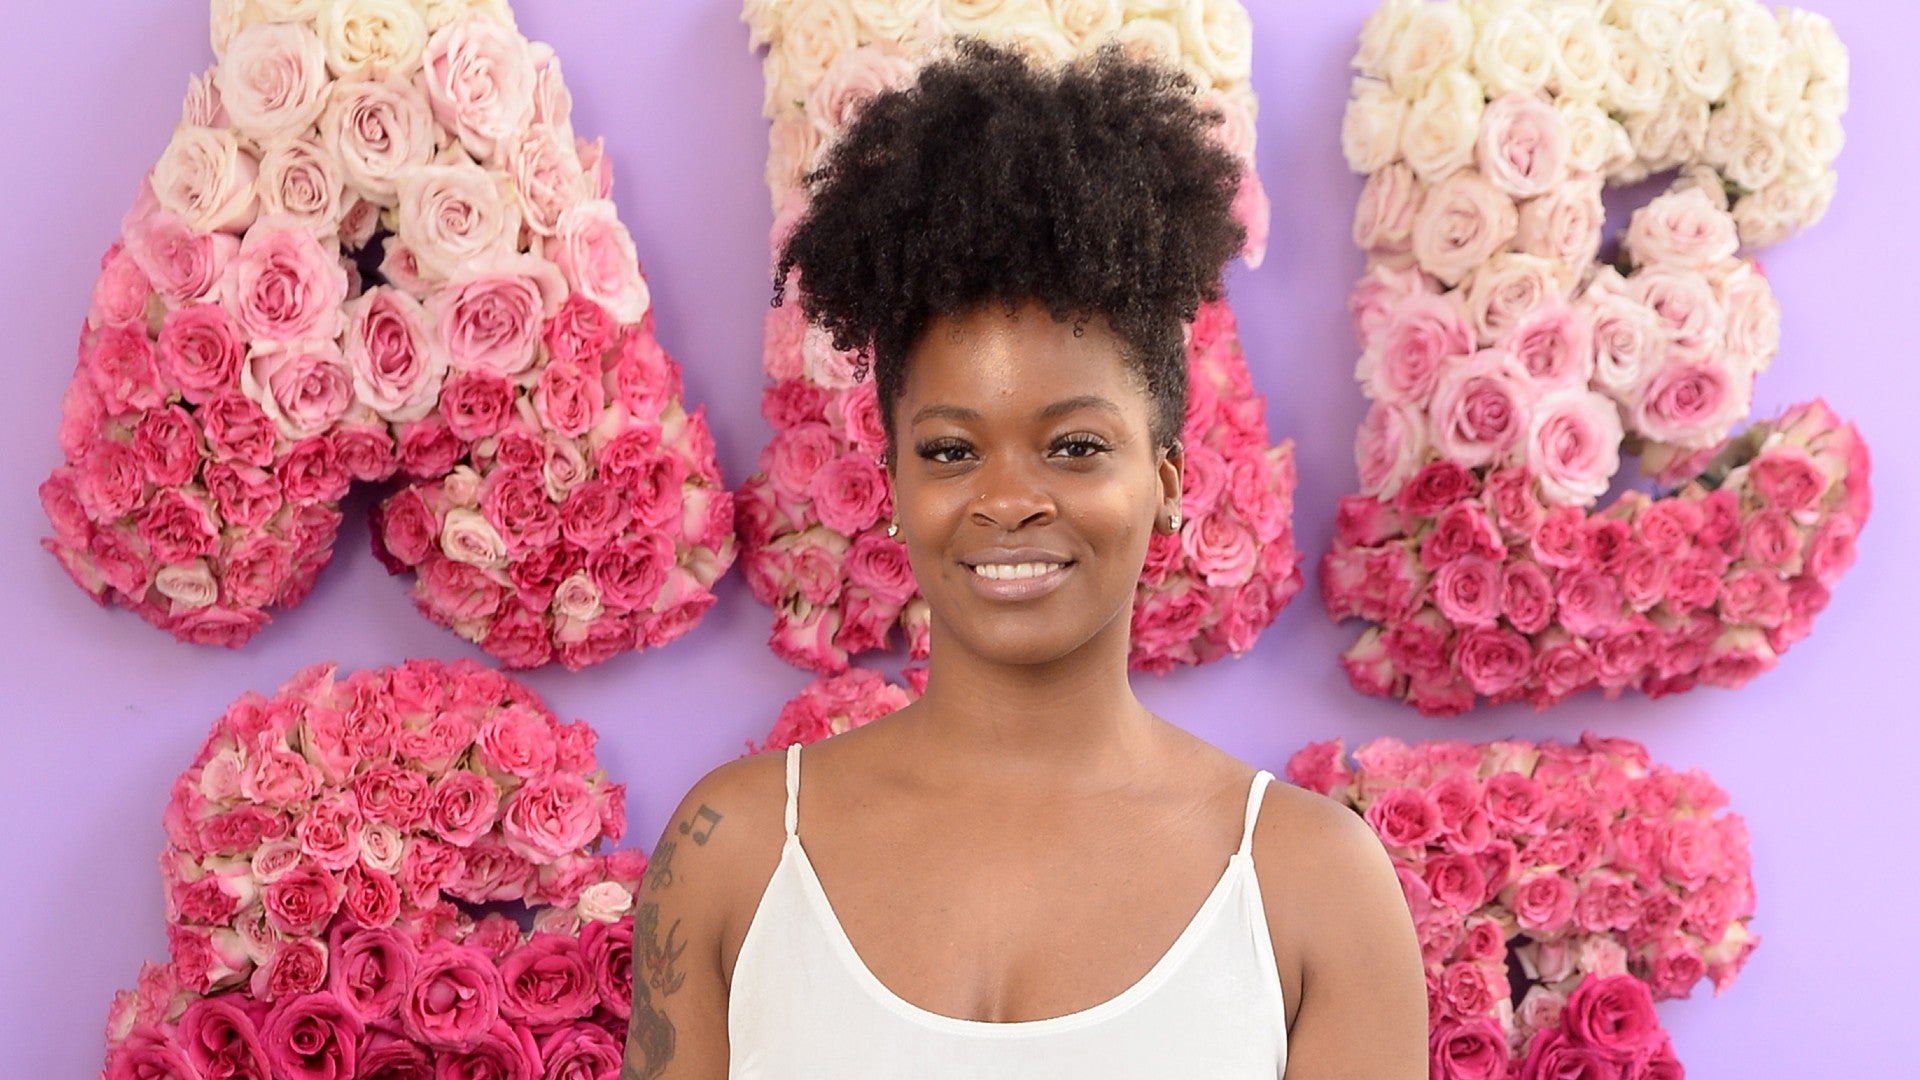 Is Ari Lennox About To Drop A Hair Care Product?